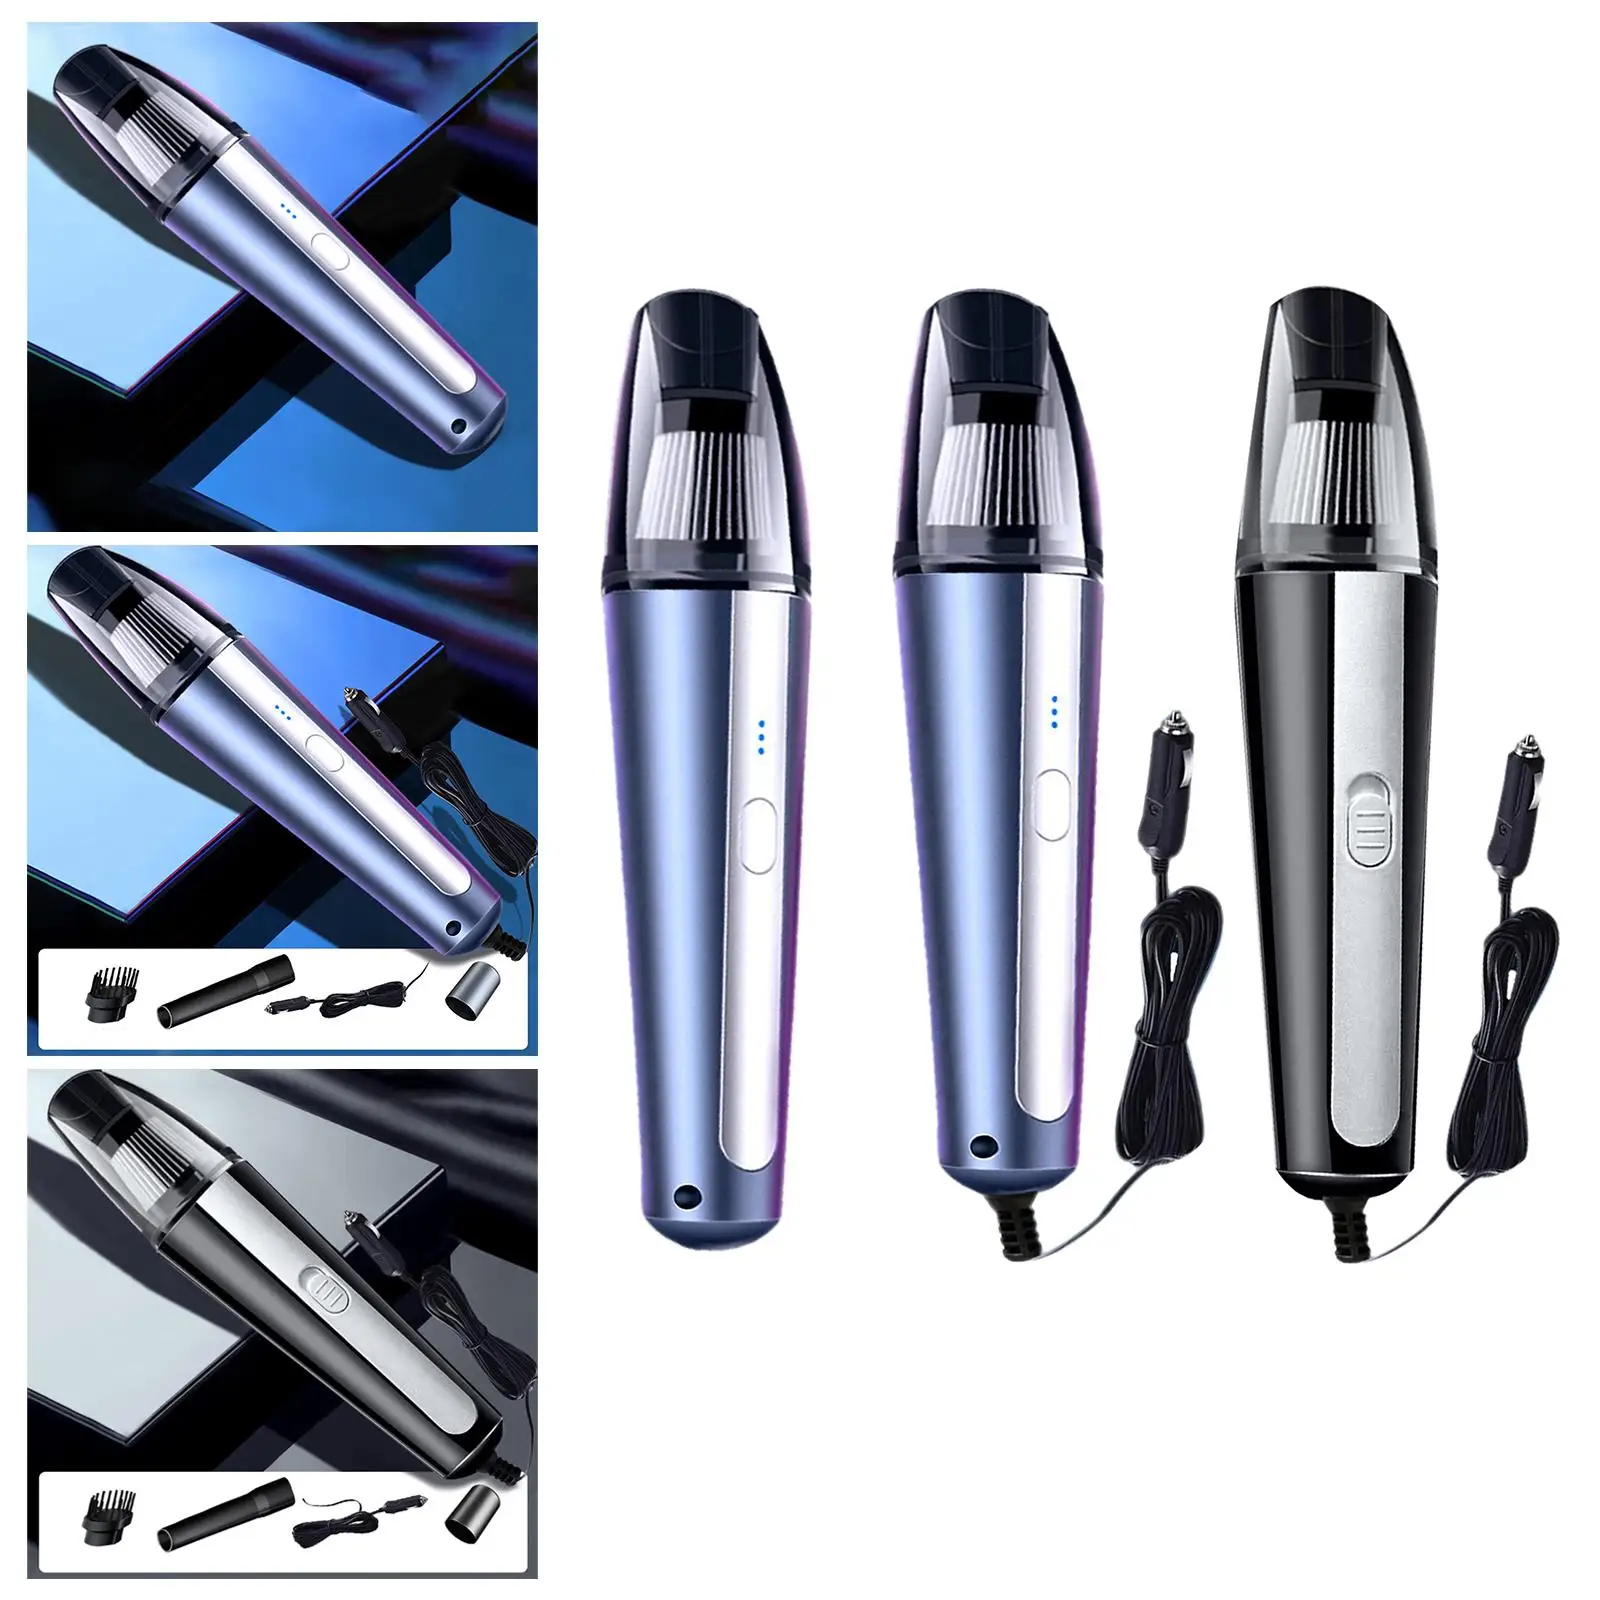 Handheld Cars Vacuum Cleaner Dry and Wet Use 6000PA Removable 2 Nozzles Cyclone Suction Fit for Home Office Seats Accessories